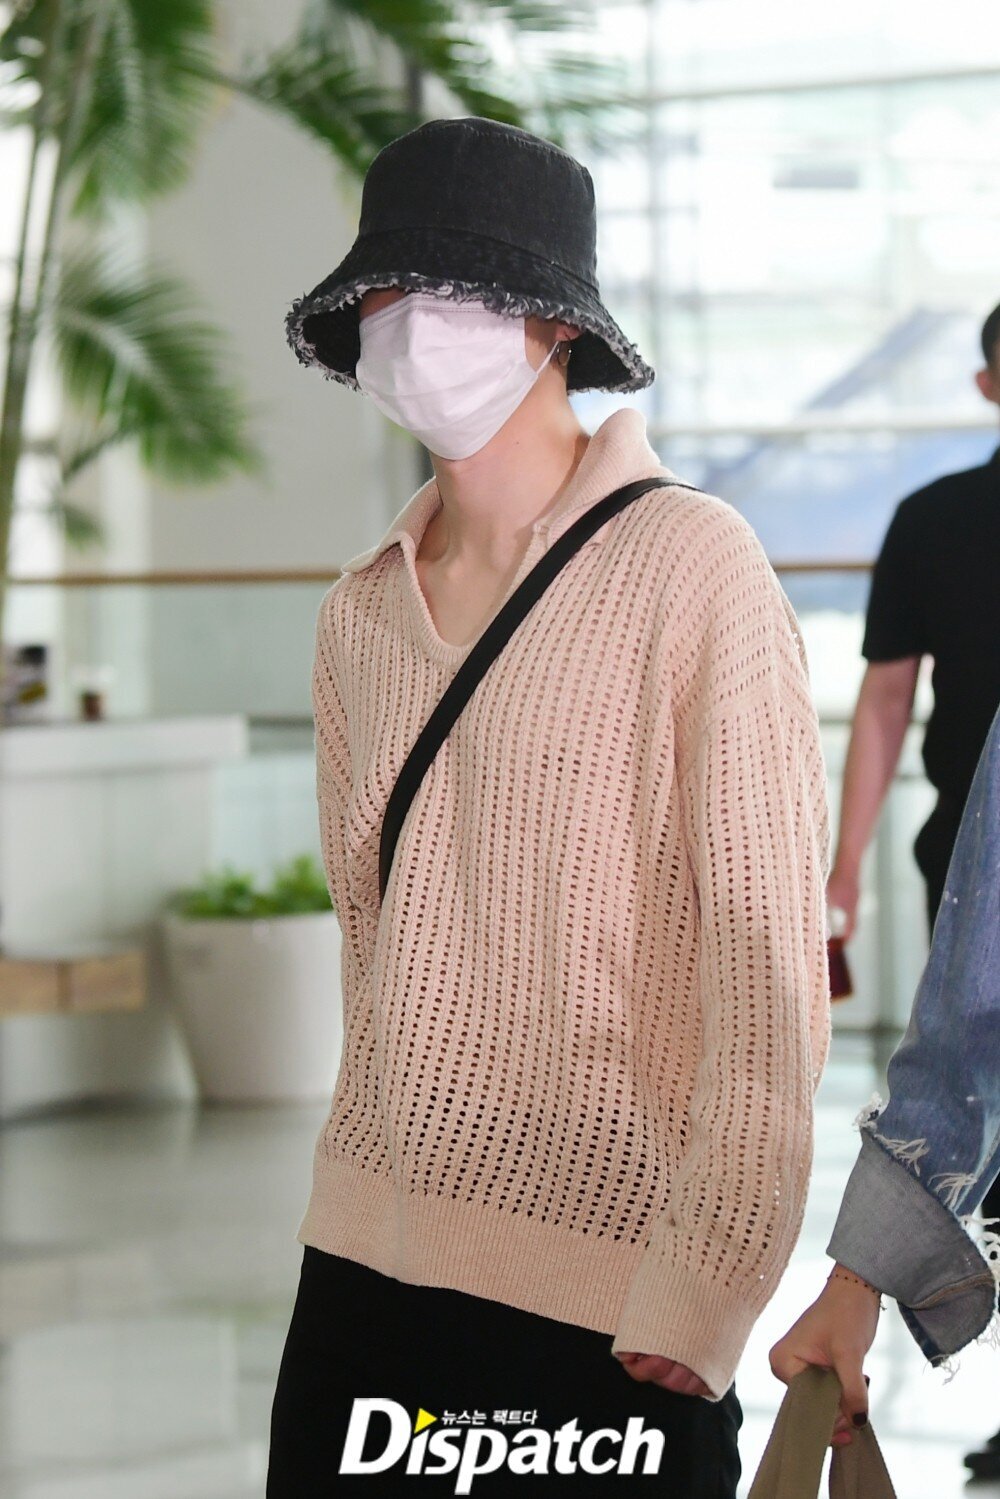 May 29, 2022 BTS Jimin at Incheon International Airport Departing for the  United States to Attend the White House Invitation